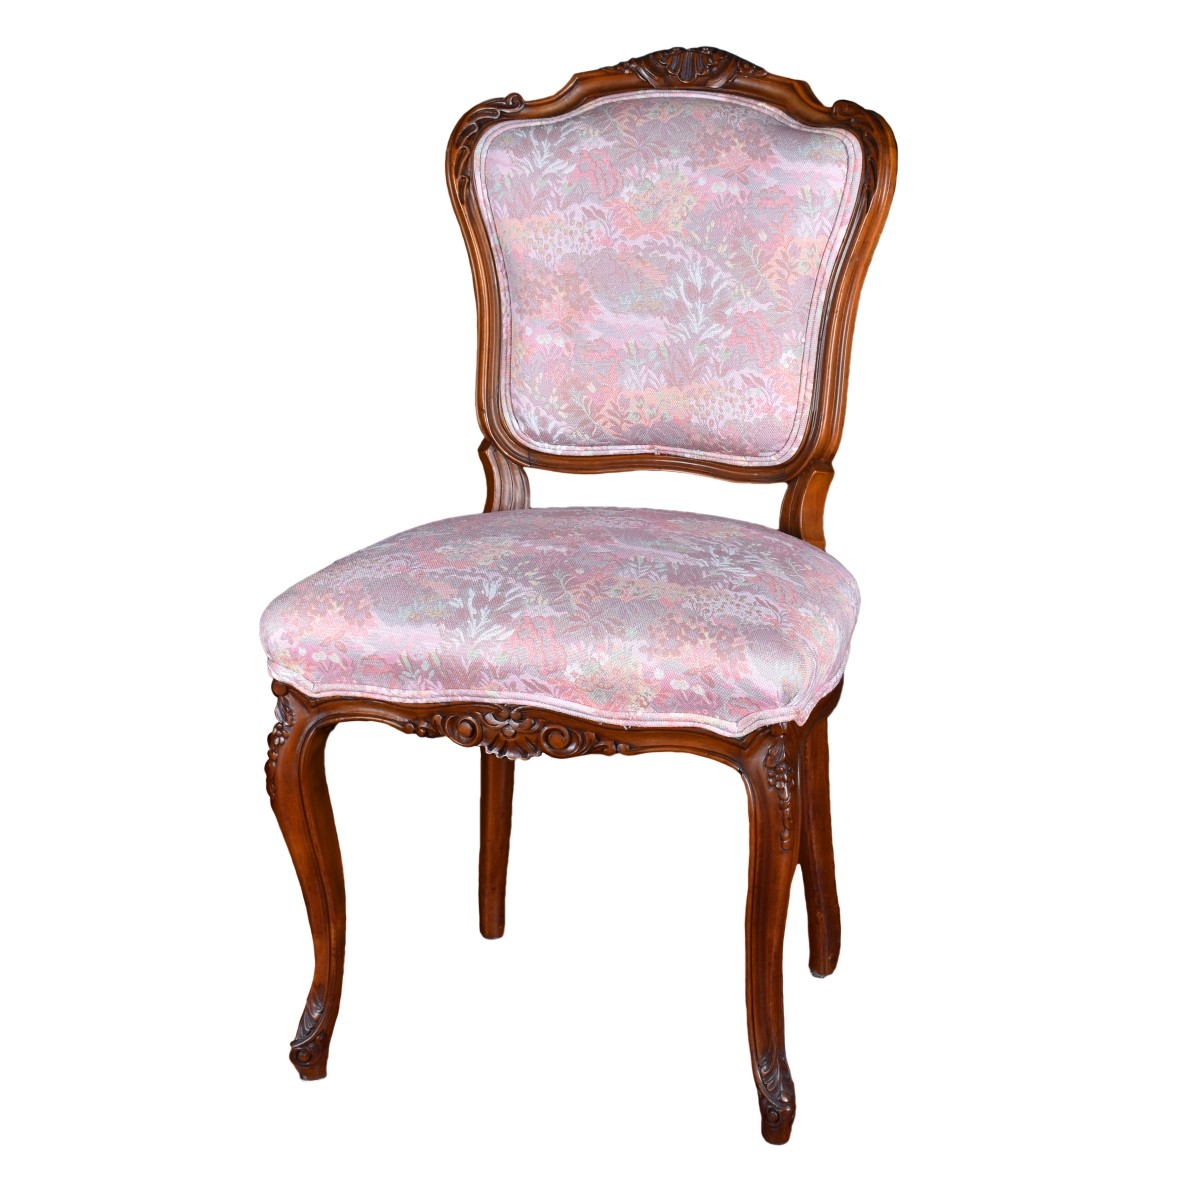 Set of Six (6) French Side Chairs